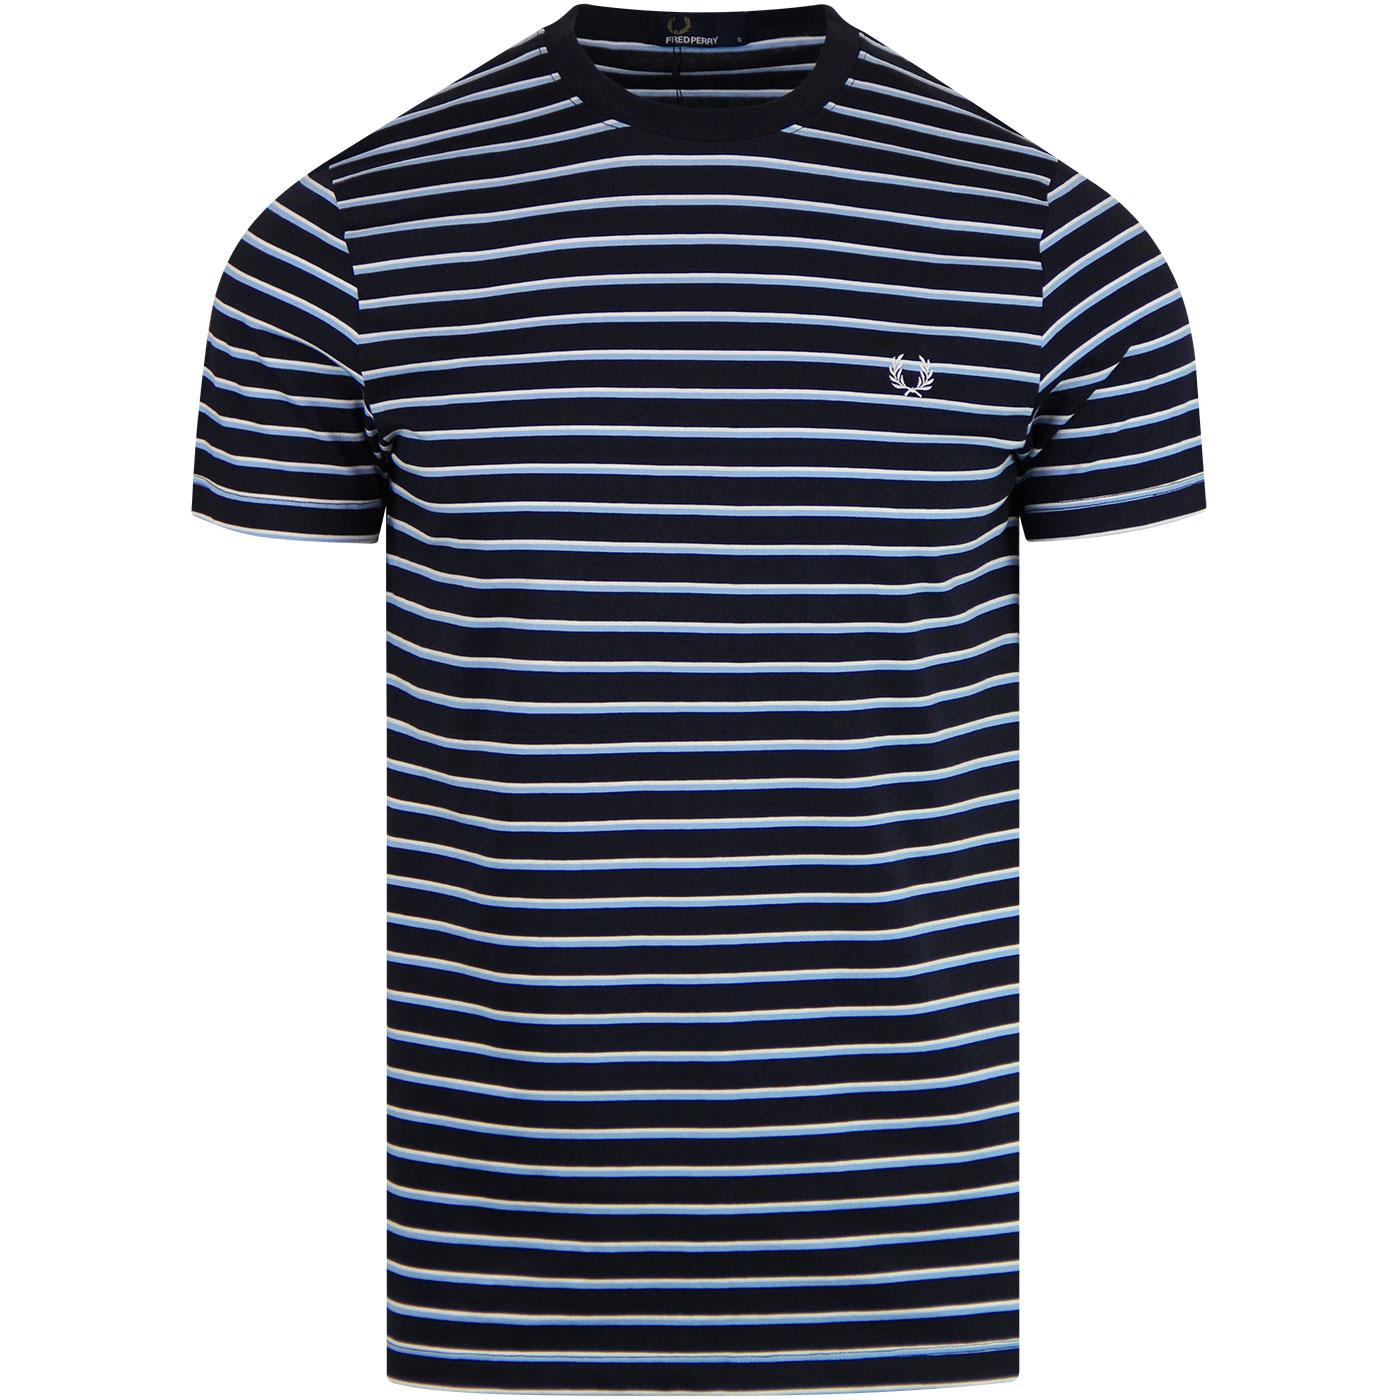 FRED PERRY Retro Fine Stripe Crew Neck T-Shirt in Navy